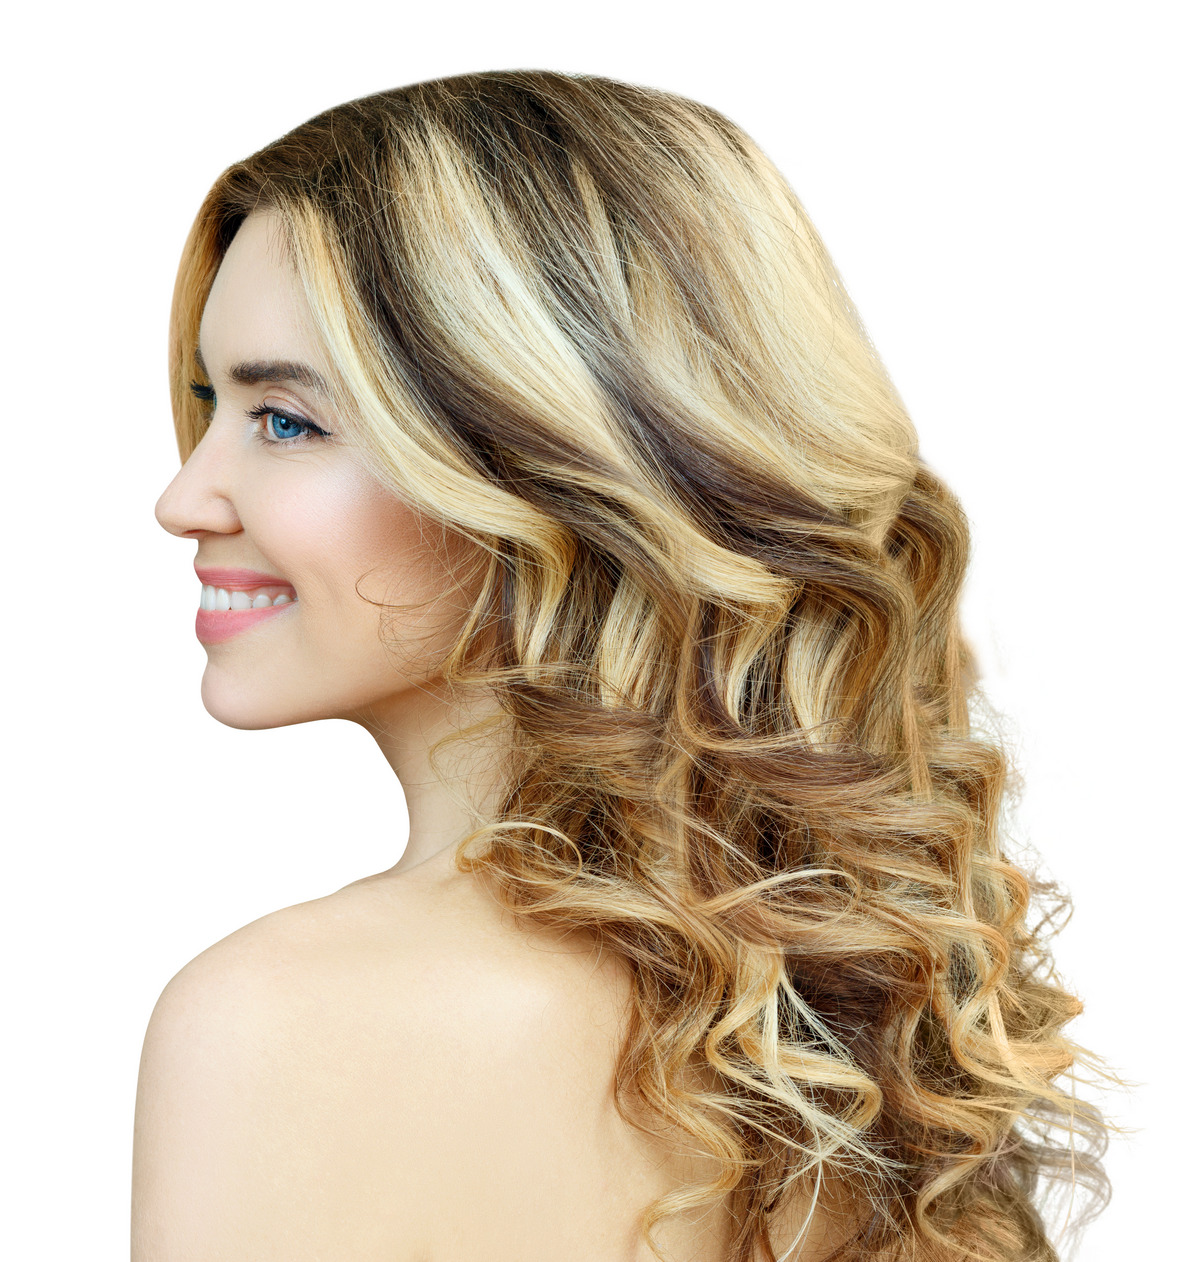 Blonde girl with balayage technique combined with impressive highlight